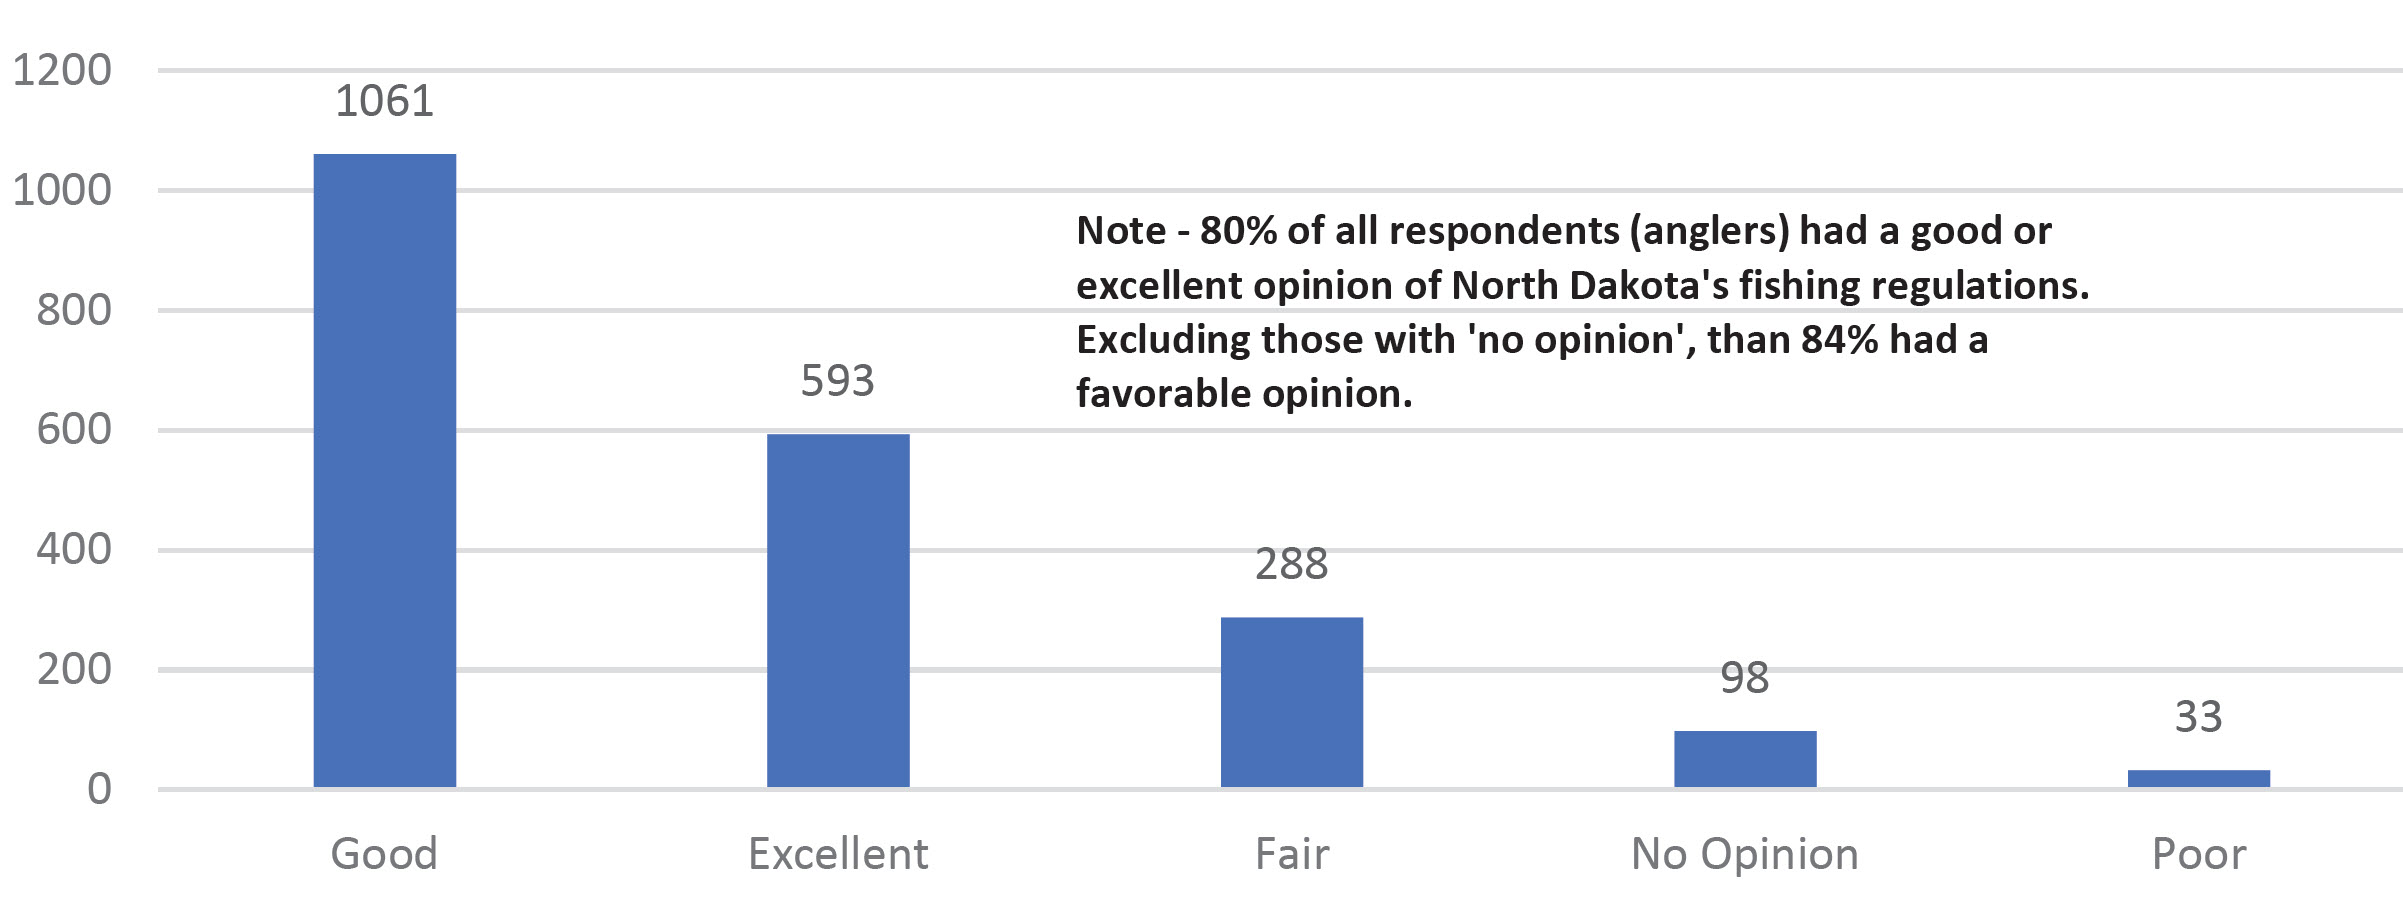 Chart showing favorable opinion of ND fishing regulations